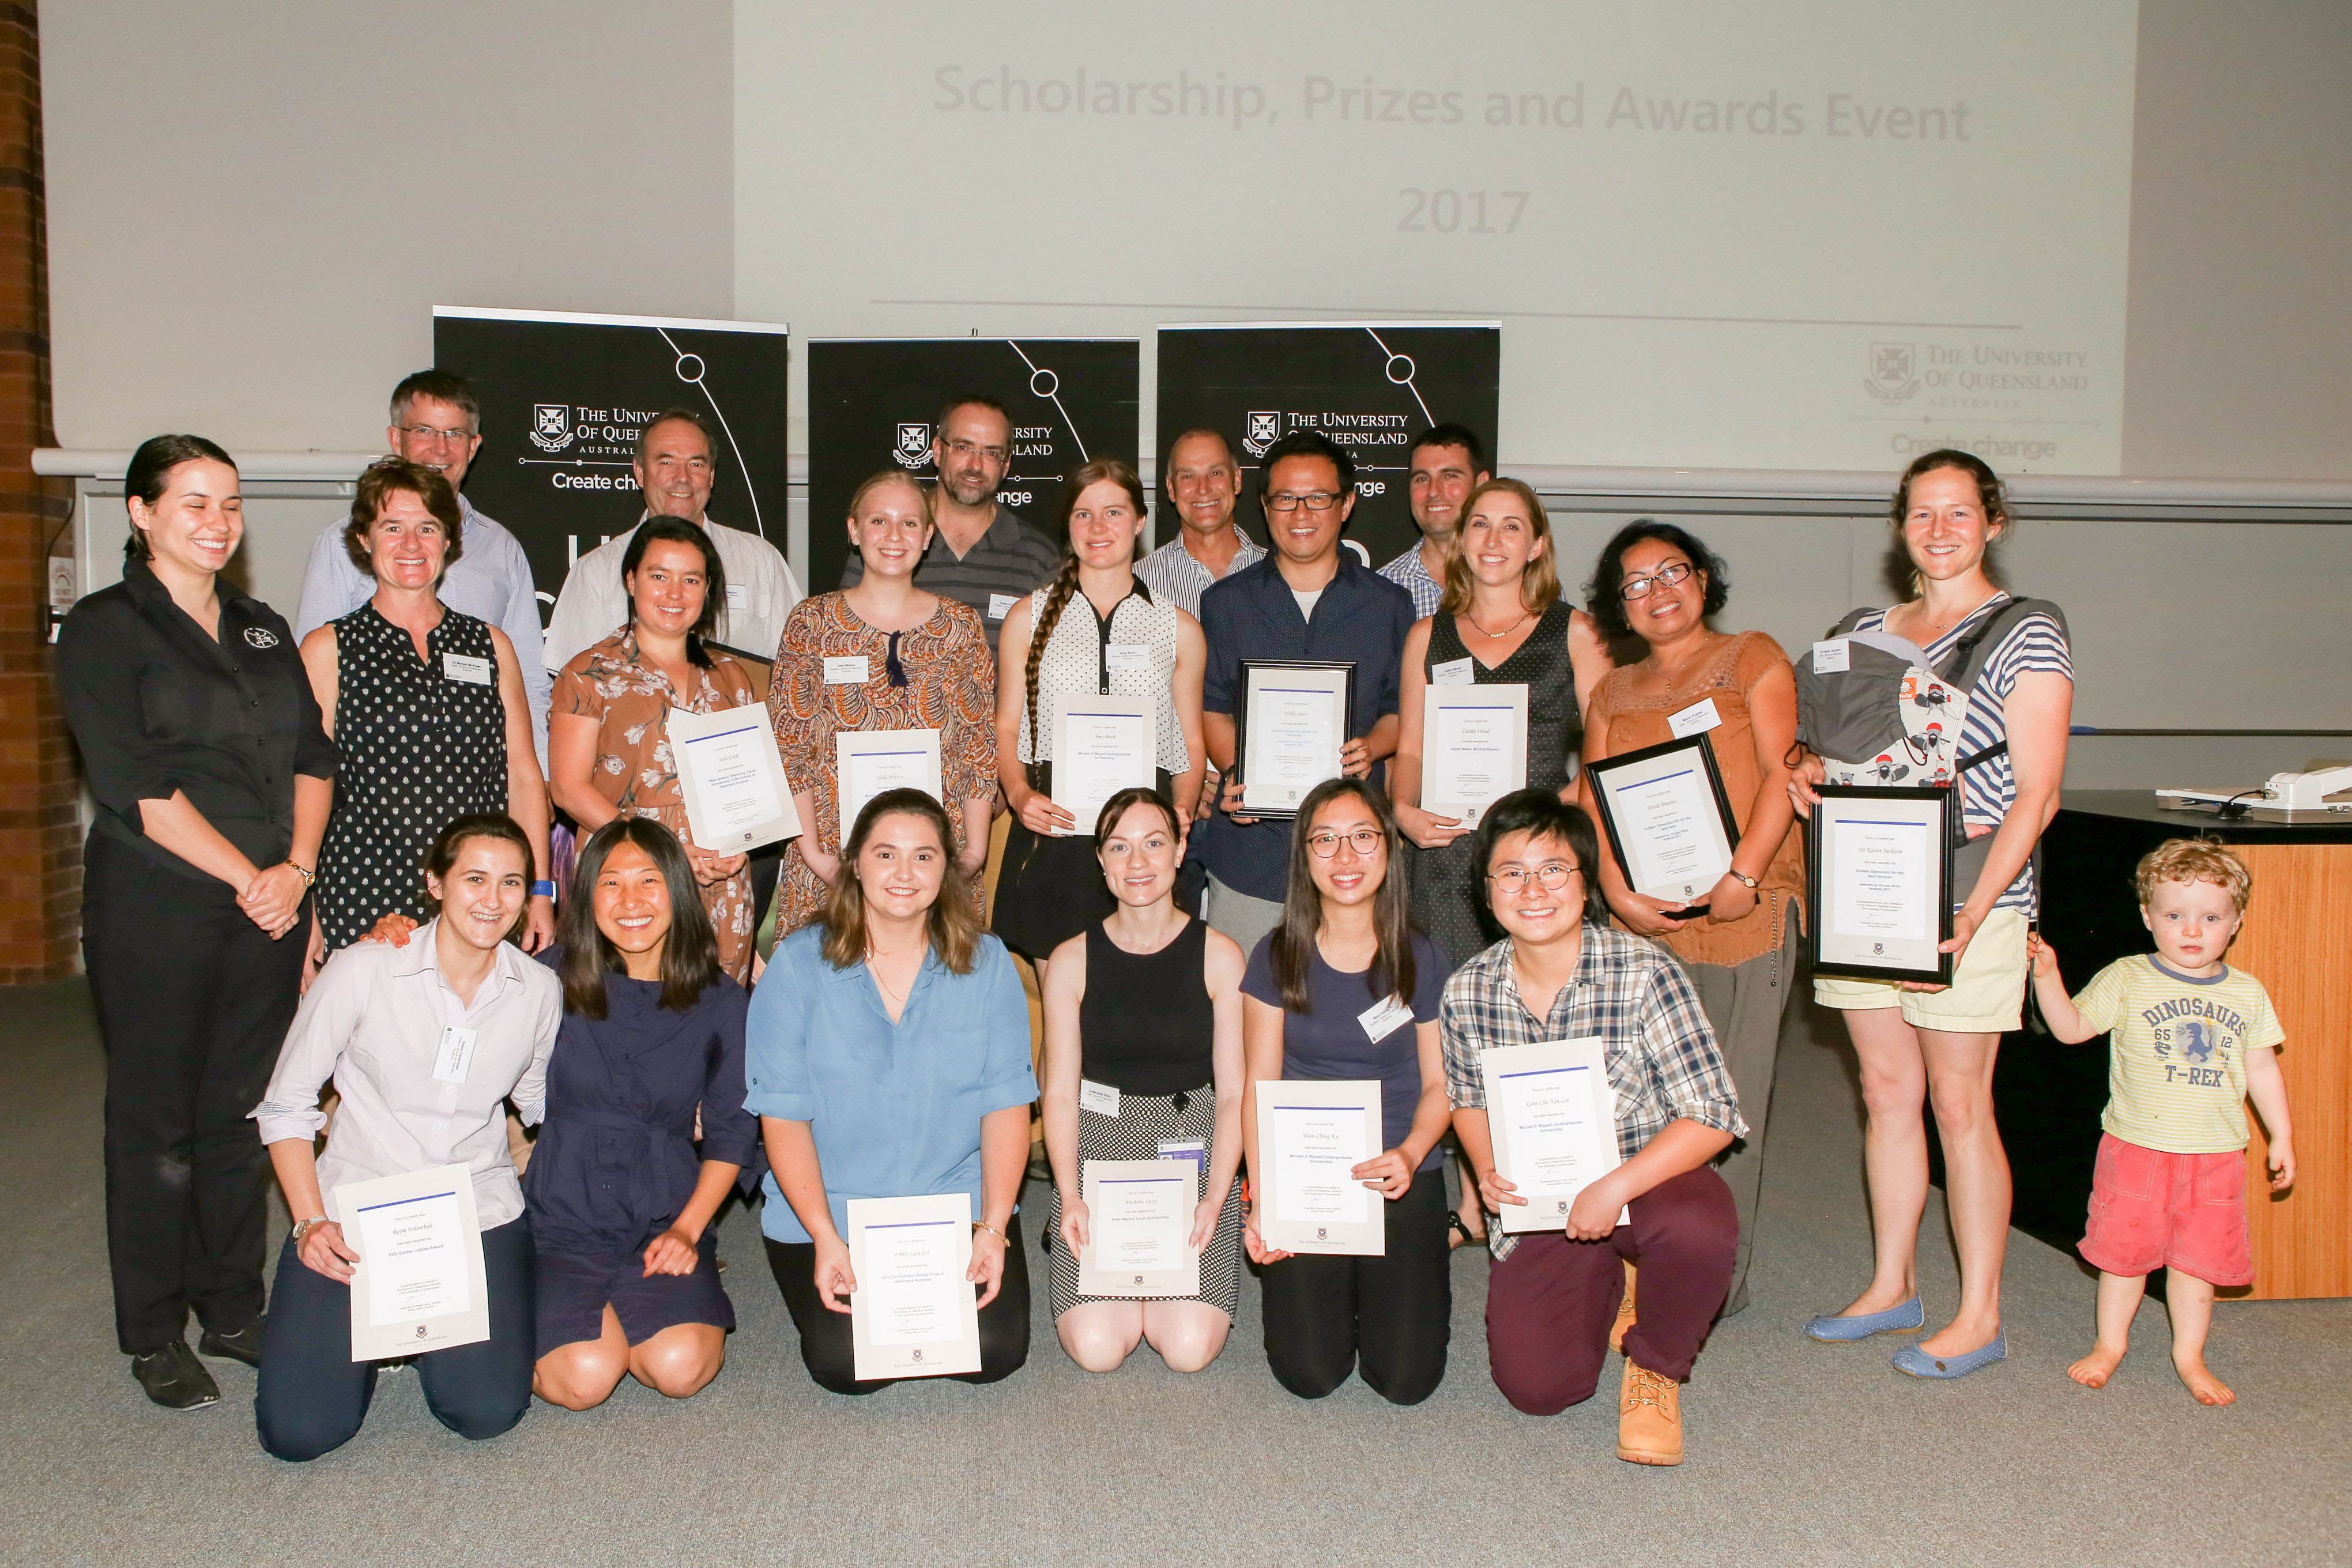 2017 SVS Scholarships and Prizes recipients